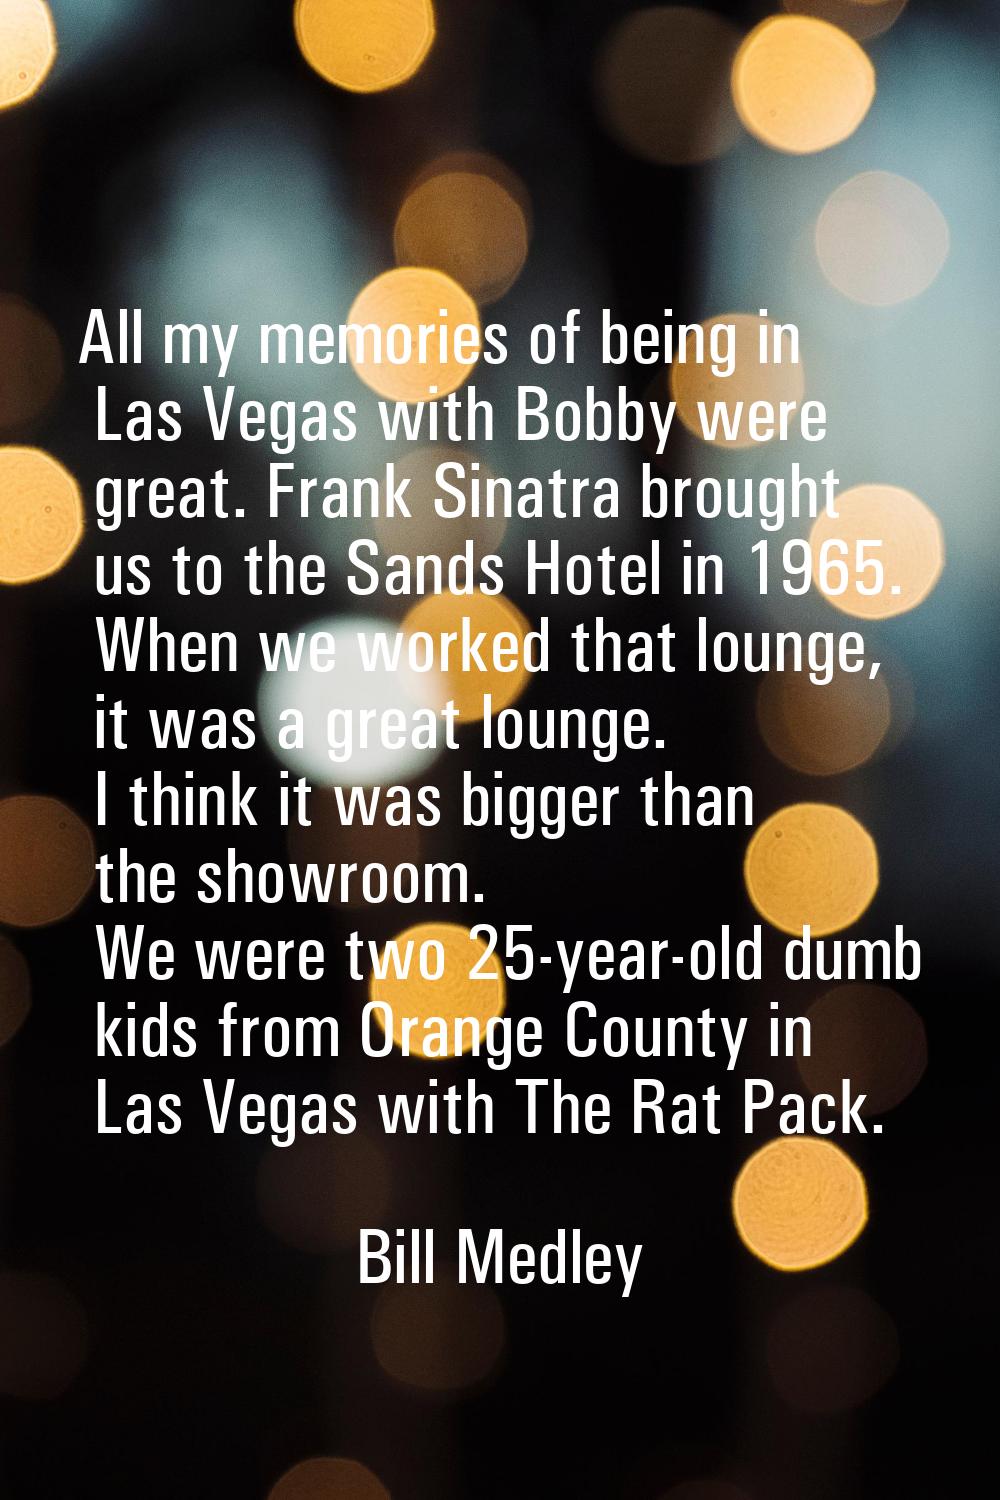 All my memories of being in Las Vegas with Bobby were great. Frank Sinatra brought us to the Sands 